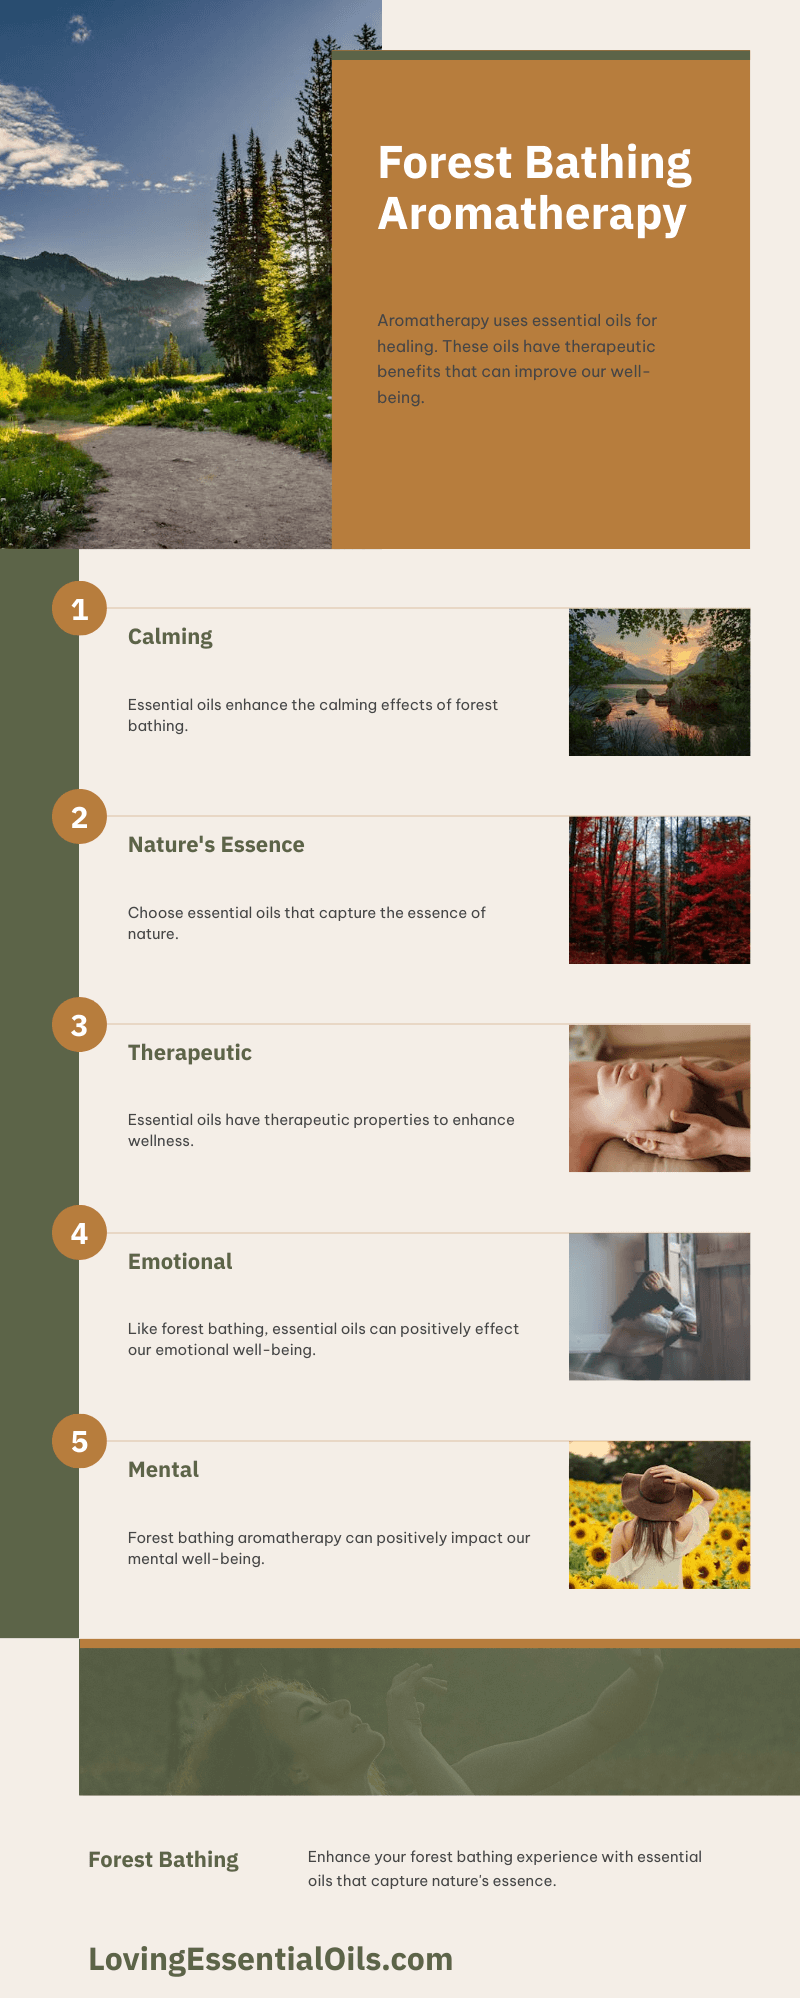 Forest Bathing and Aromatherapy by Loving Essential Oils